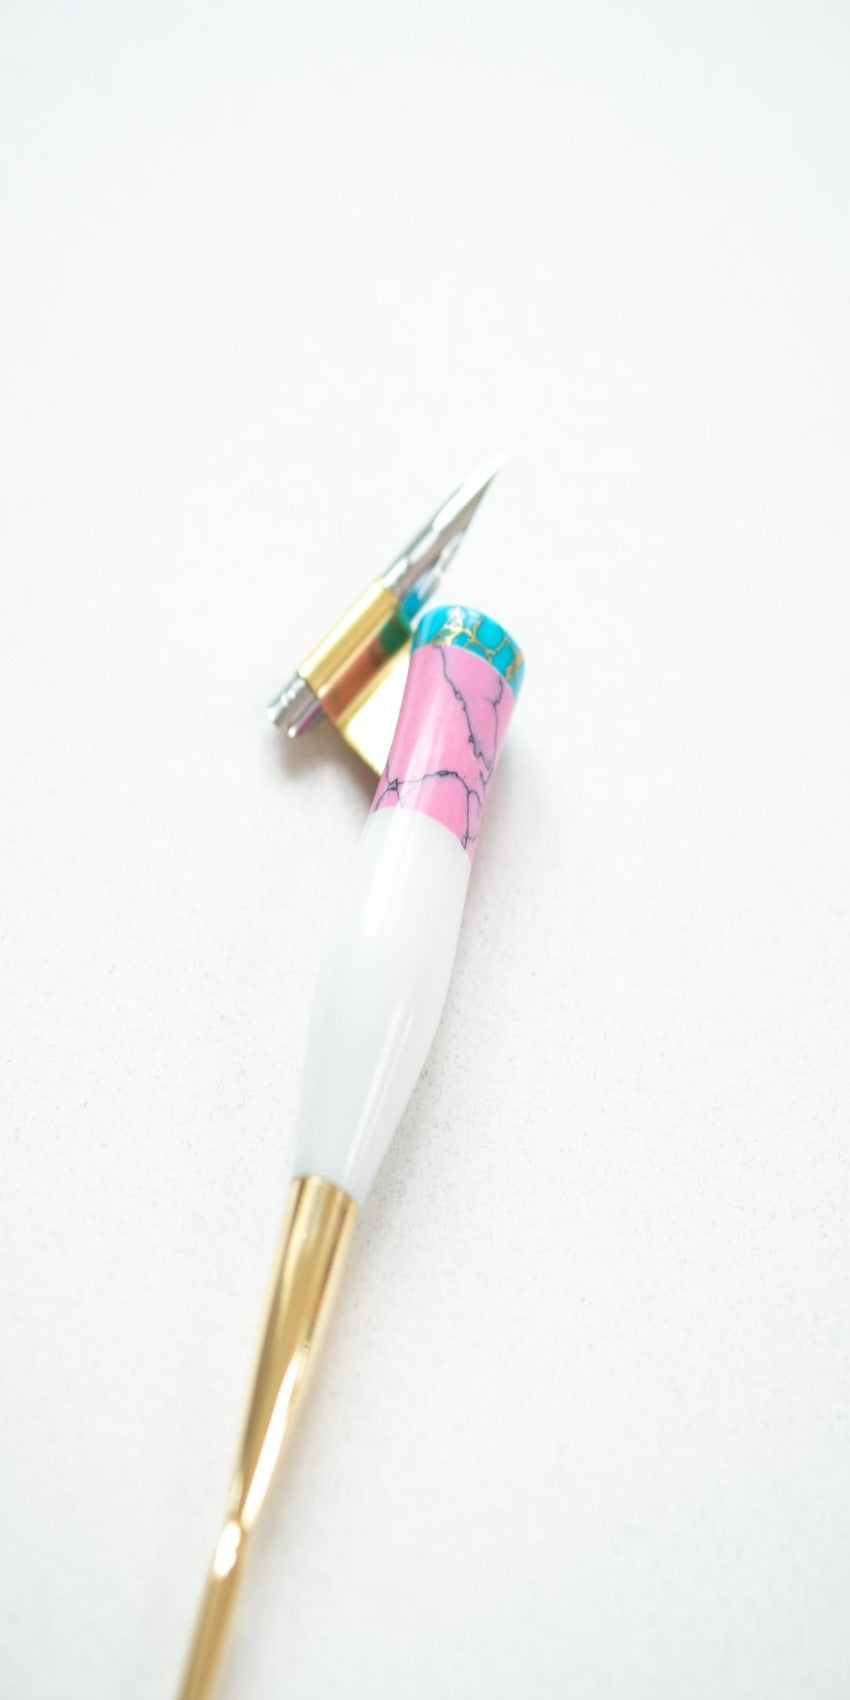 Pink + Turquoise - Marble Oblique calligraphy pen on white desk